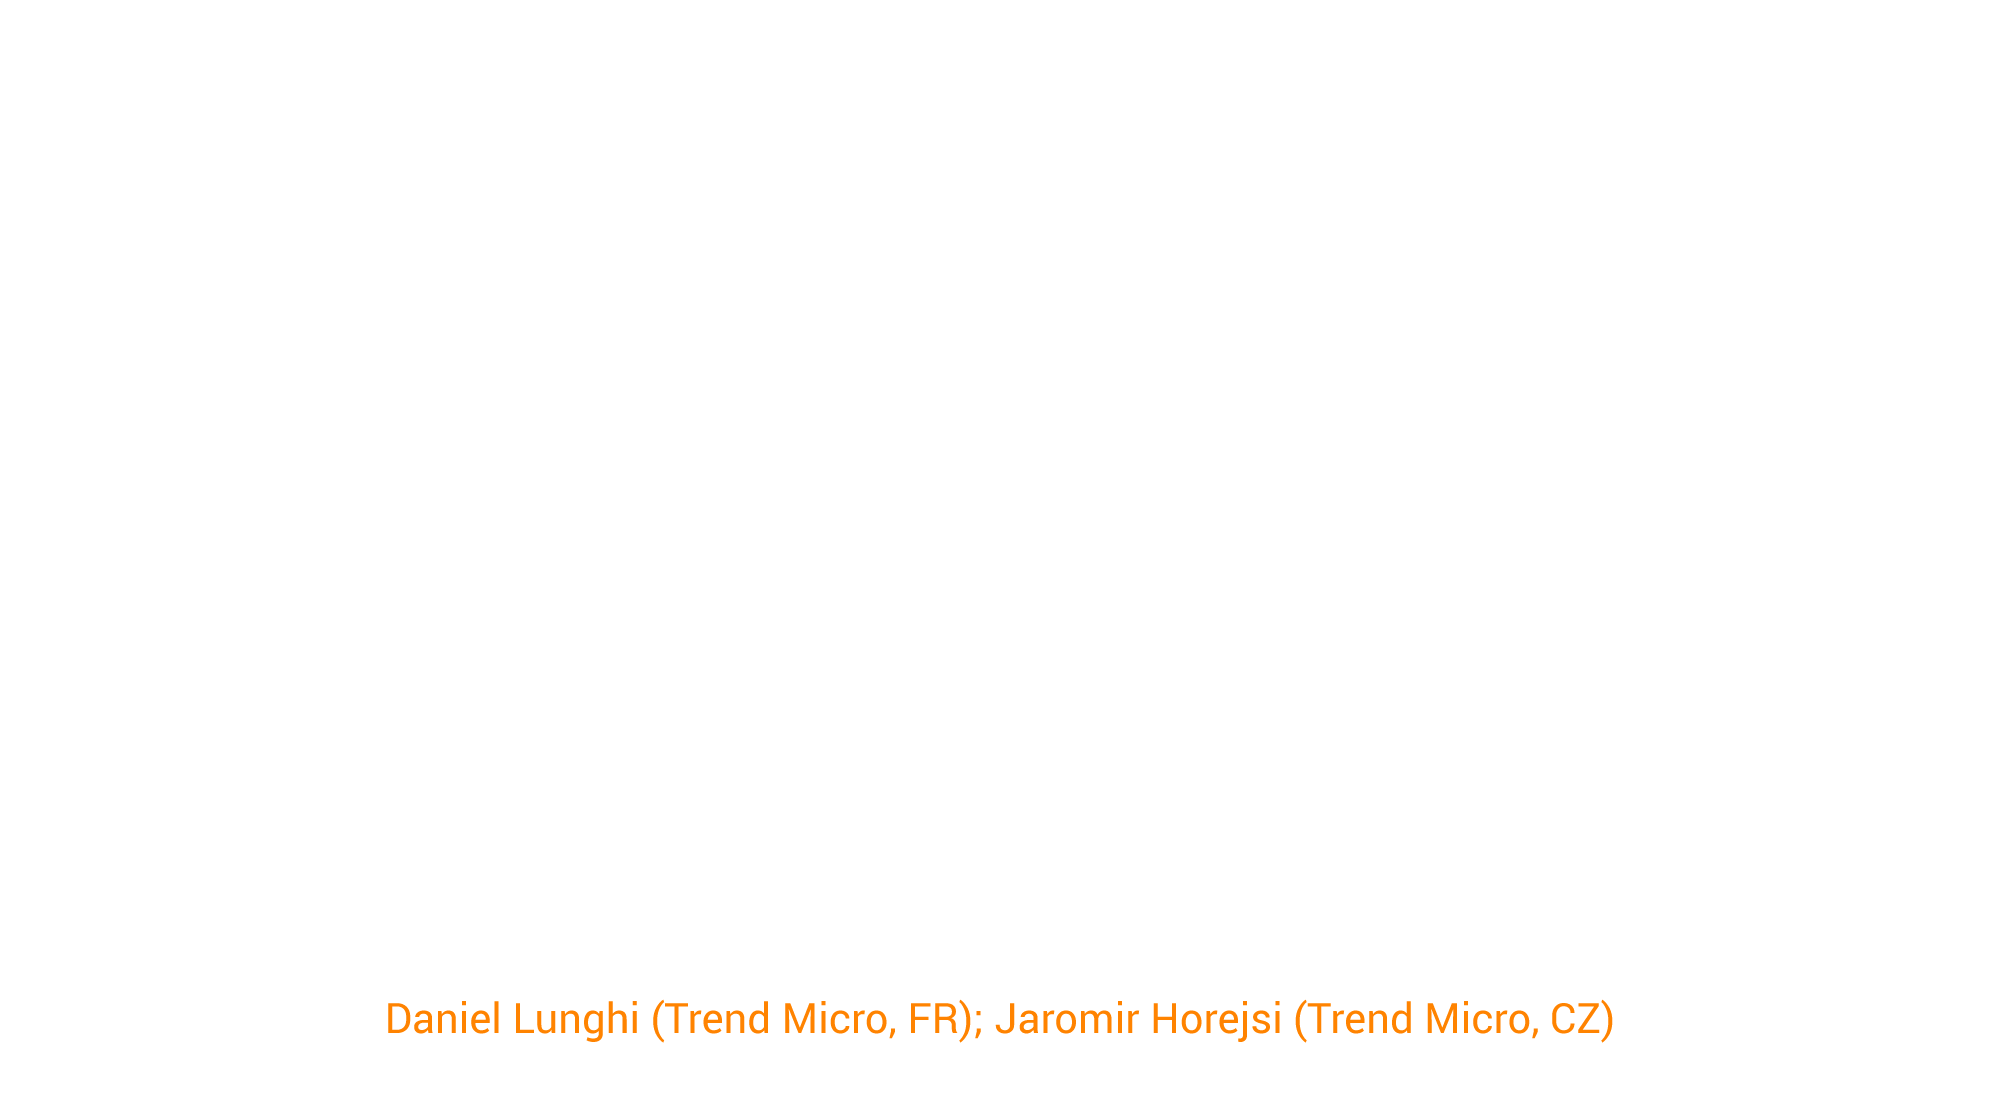 Operation GamblingPuppet: Analysis of a Multivector and Multiplatform Campaign Targeting Online Gambling Customers